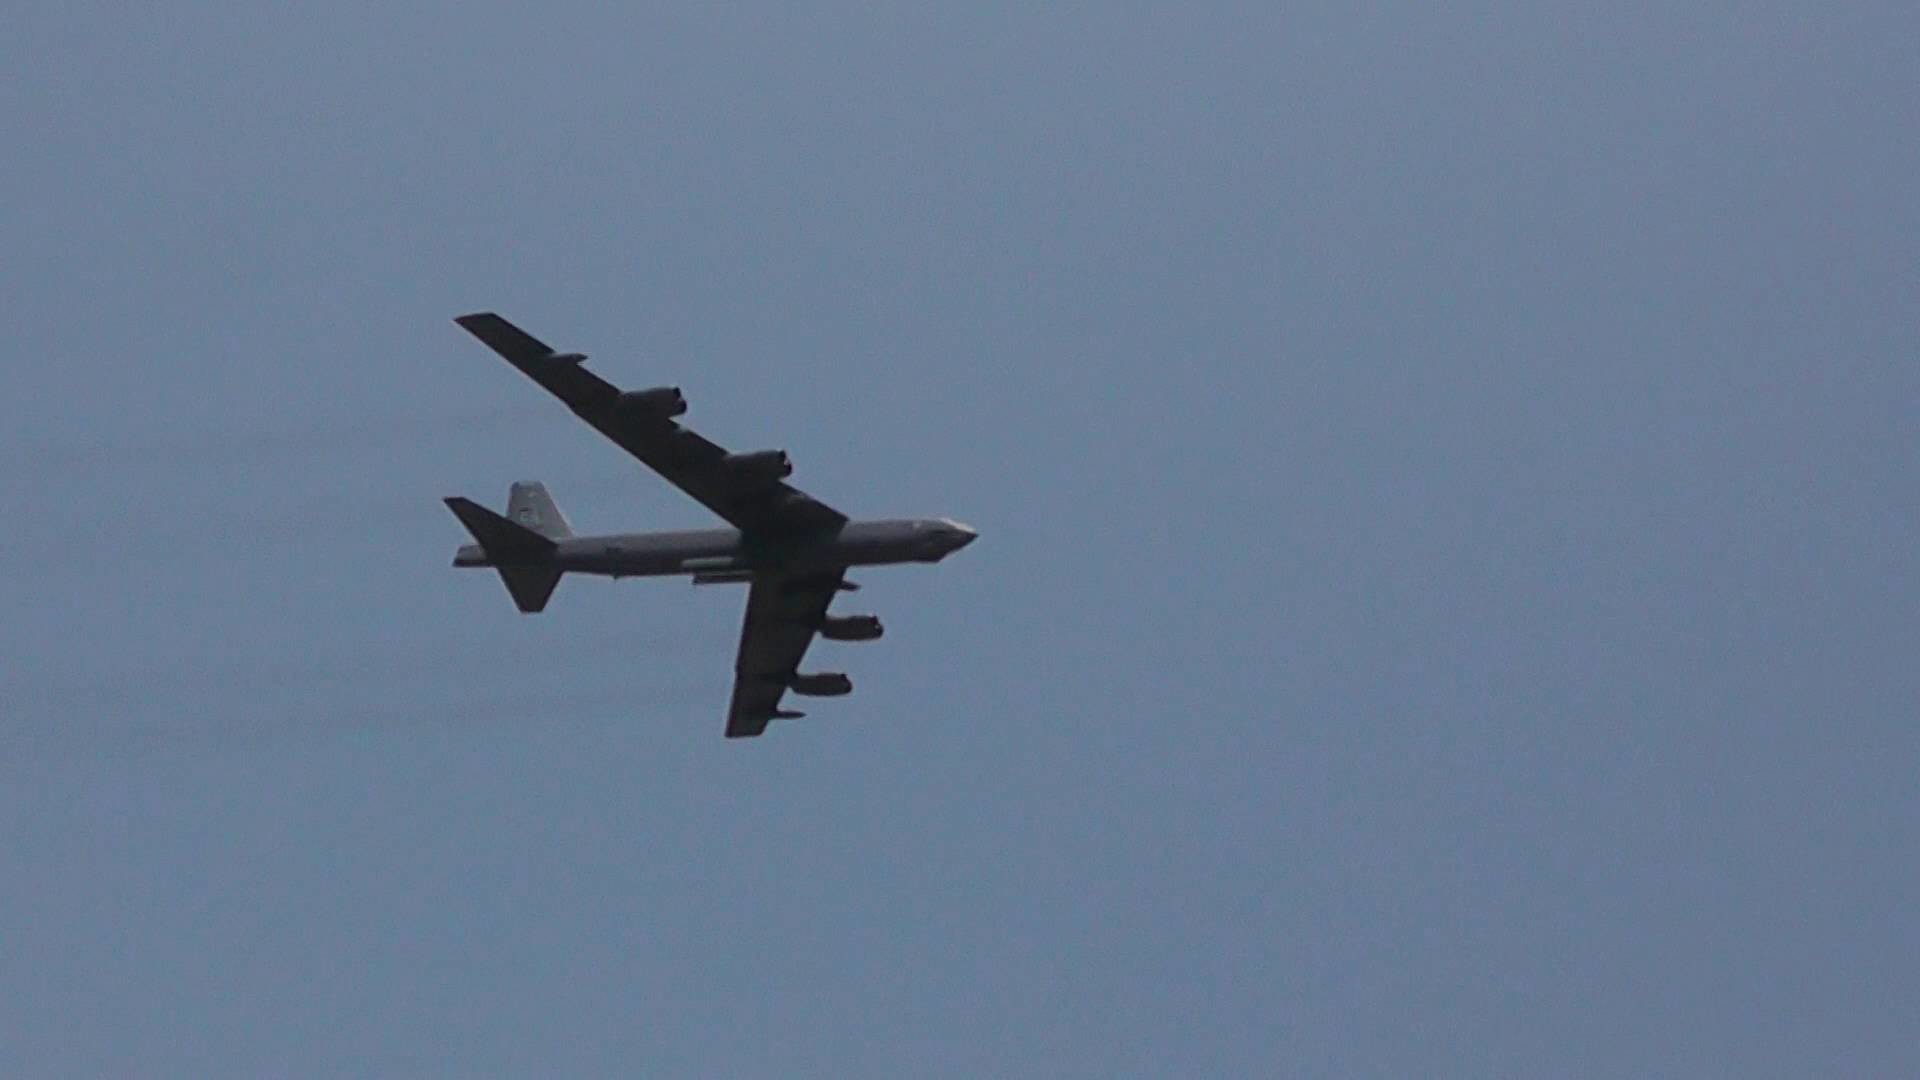 1920x1080 Fly-past by Boeing B-52 Stratofortress (USAF) bomber for LIMA 2015 Airshow